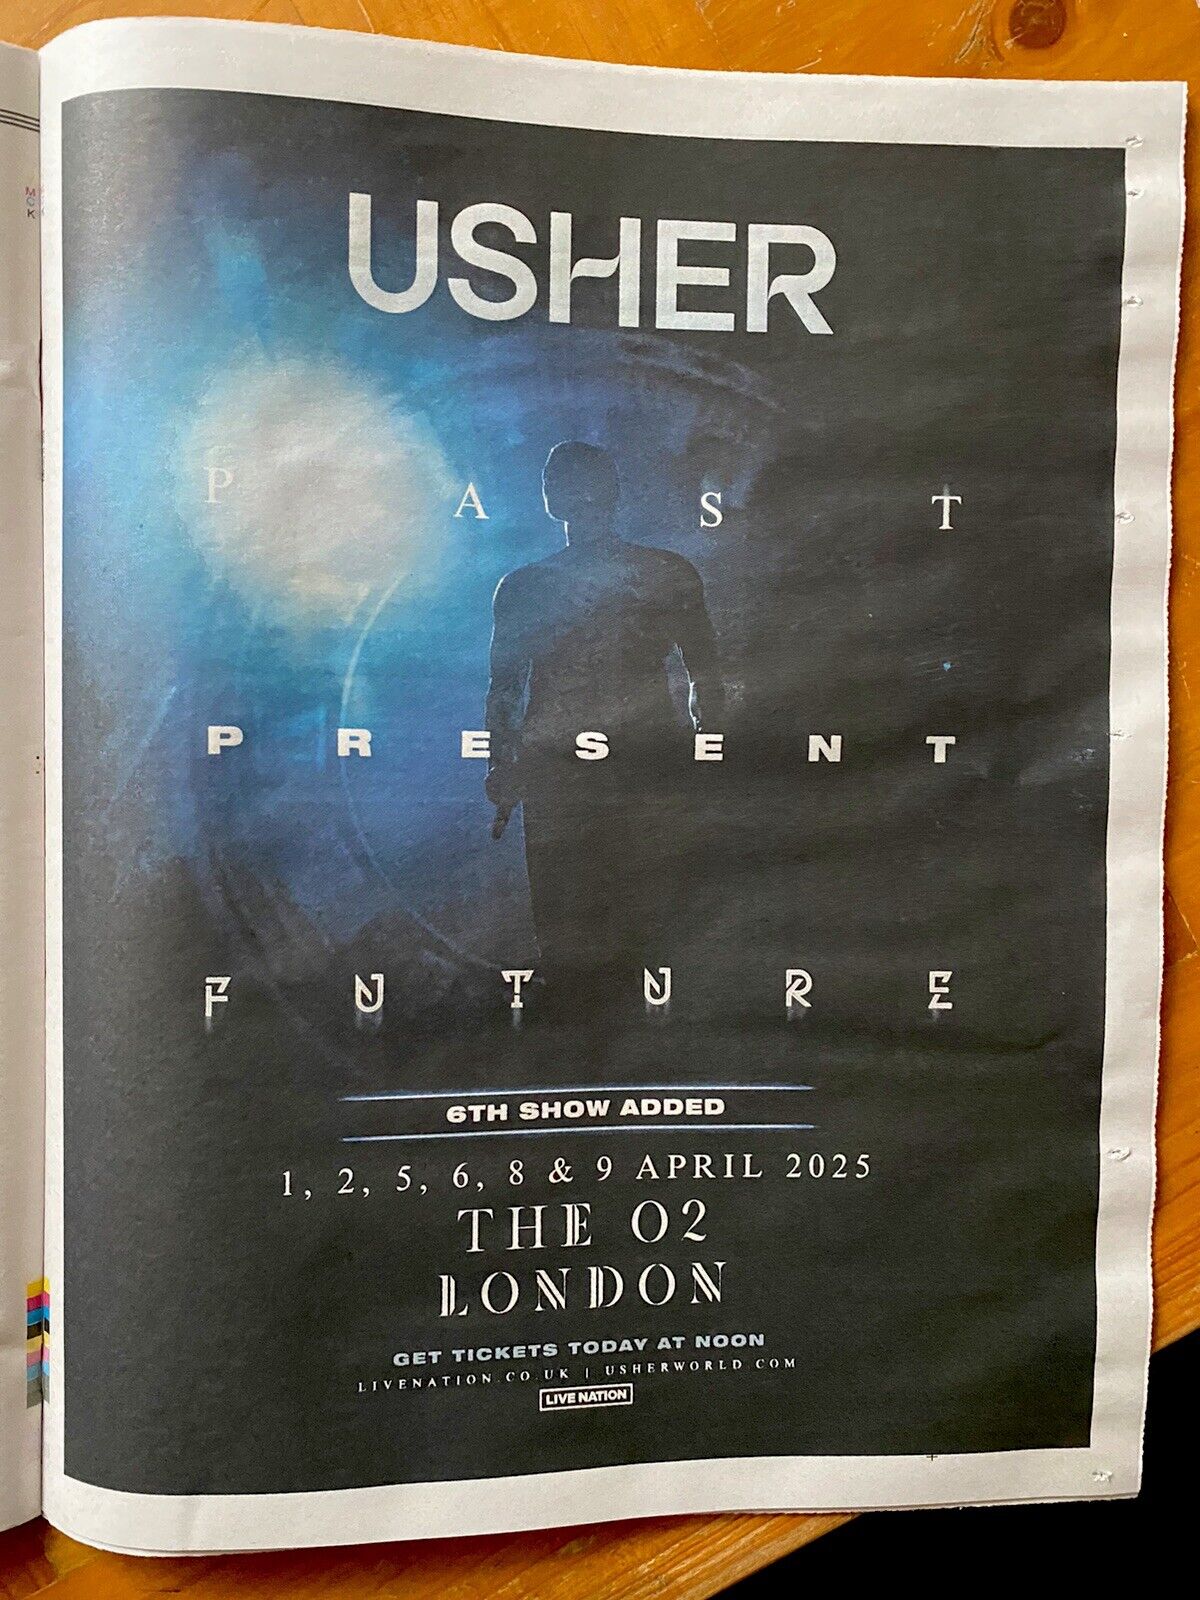 USHER Tour Dates Ad 2025 Past Present Newspaper Advert Poster Full Page 14x11